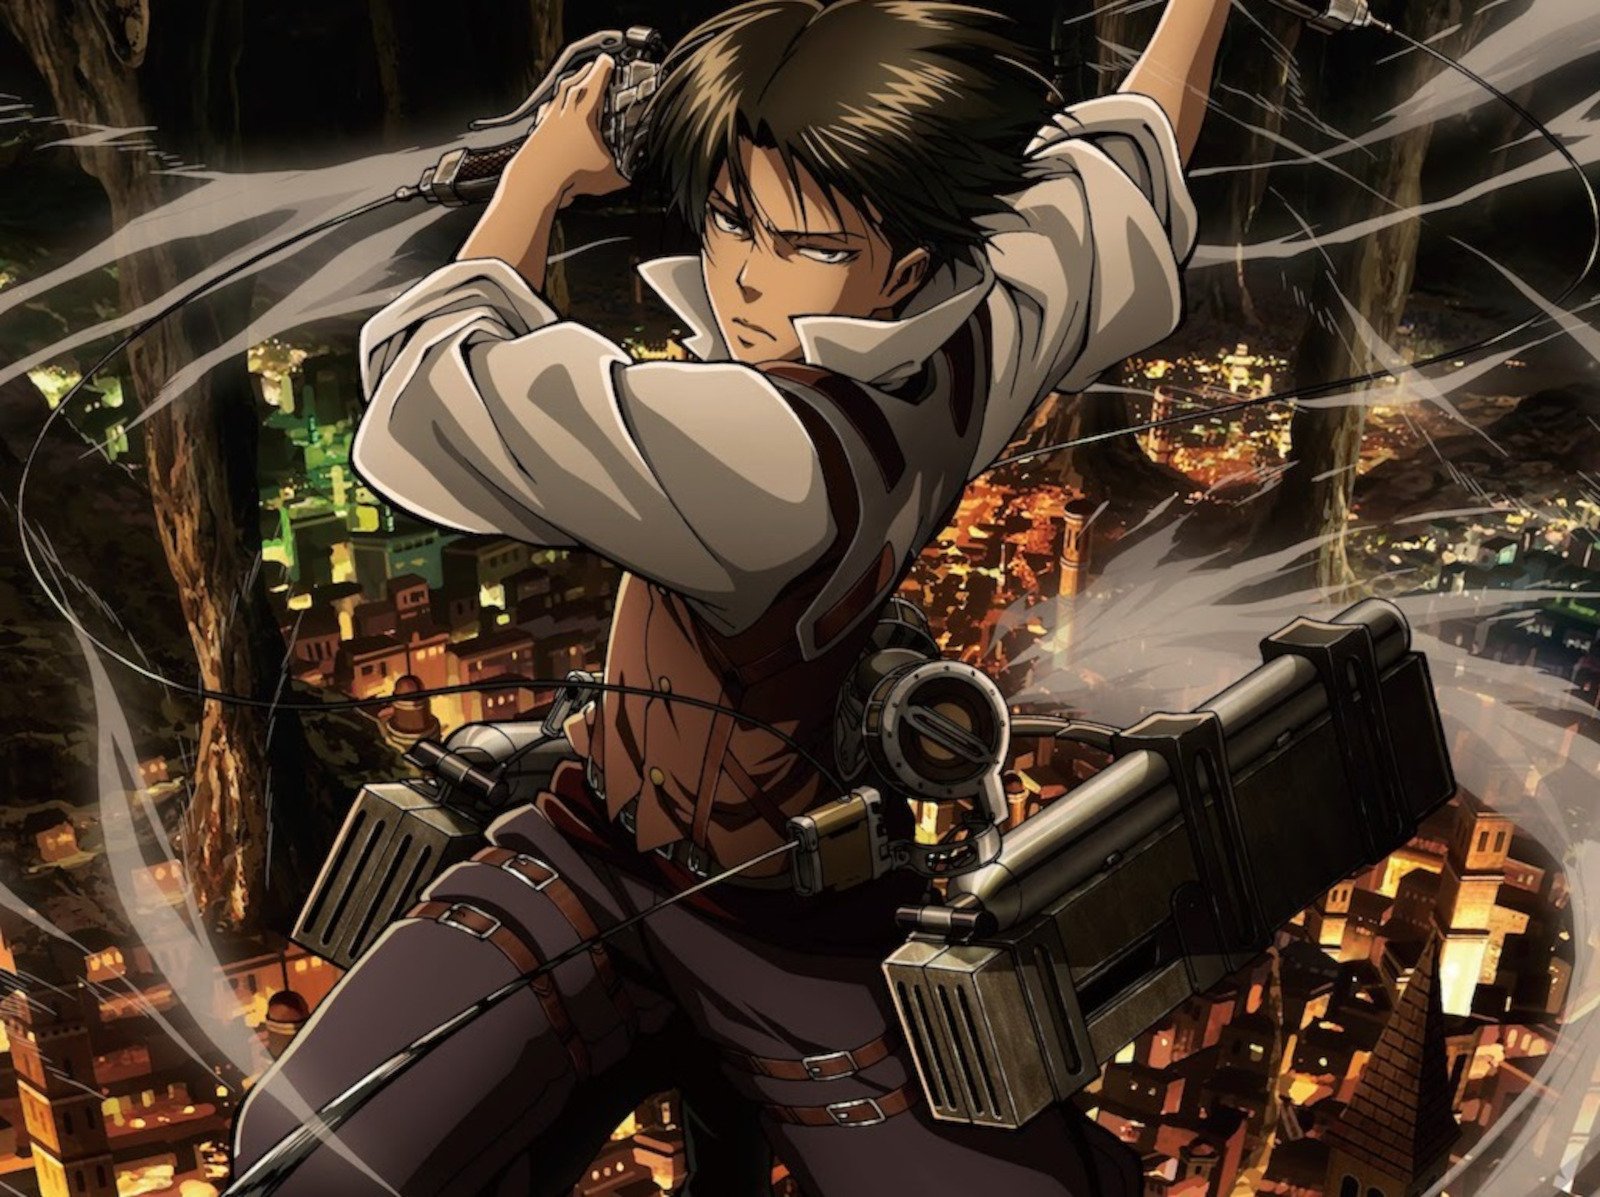 Levi Ackerman in 'Attack on Titan' poster art for the OAD episodes coming to Crunchyroll and Funimation.